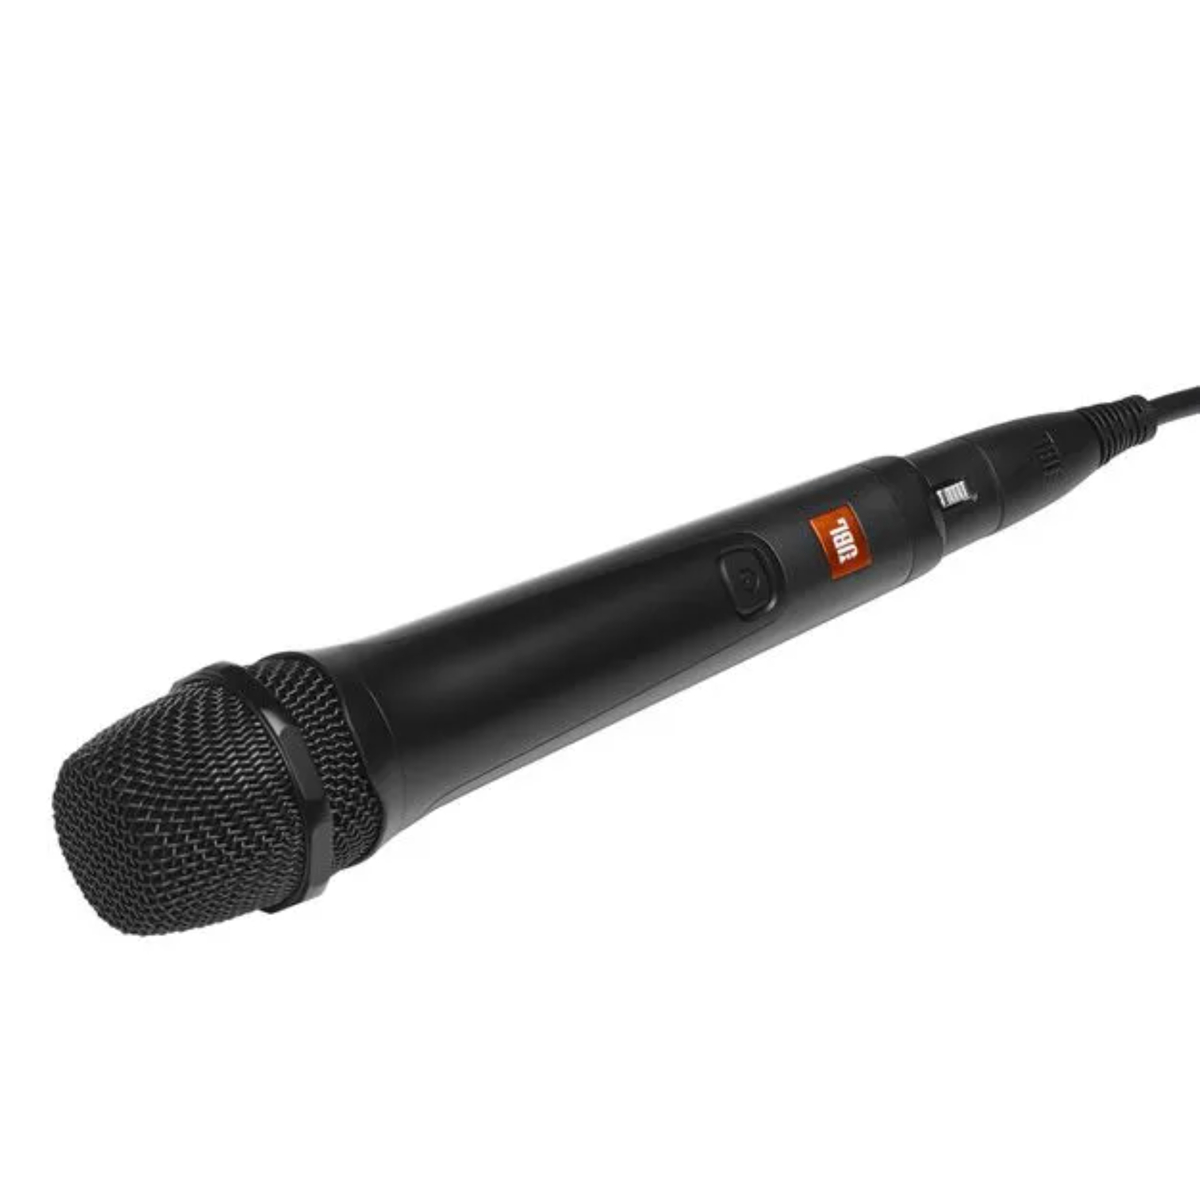 JBL Wired Dynamic Vocal Microphone with Cable, Black, JBLPBM100